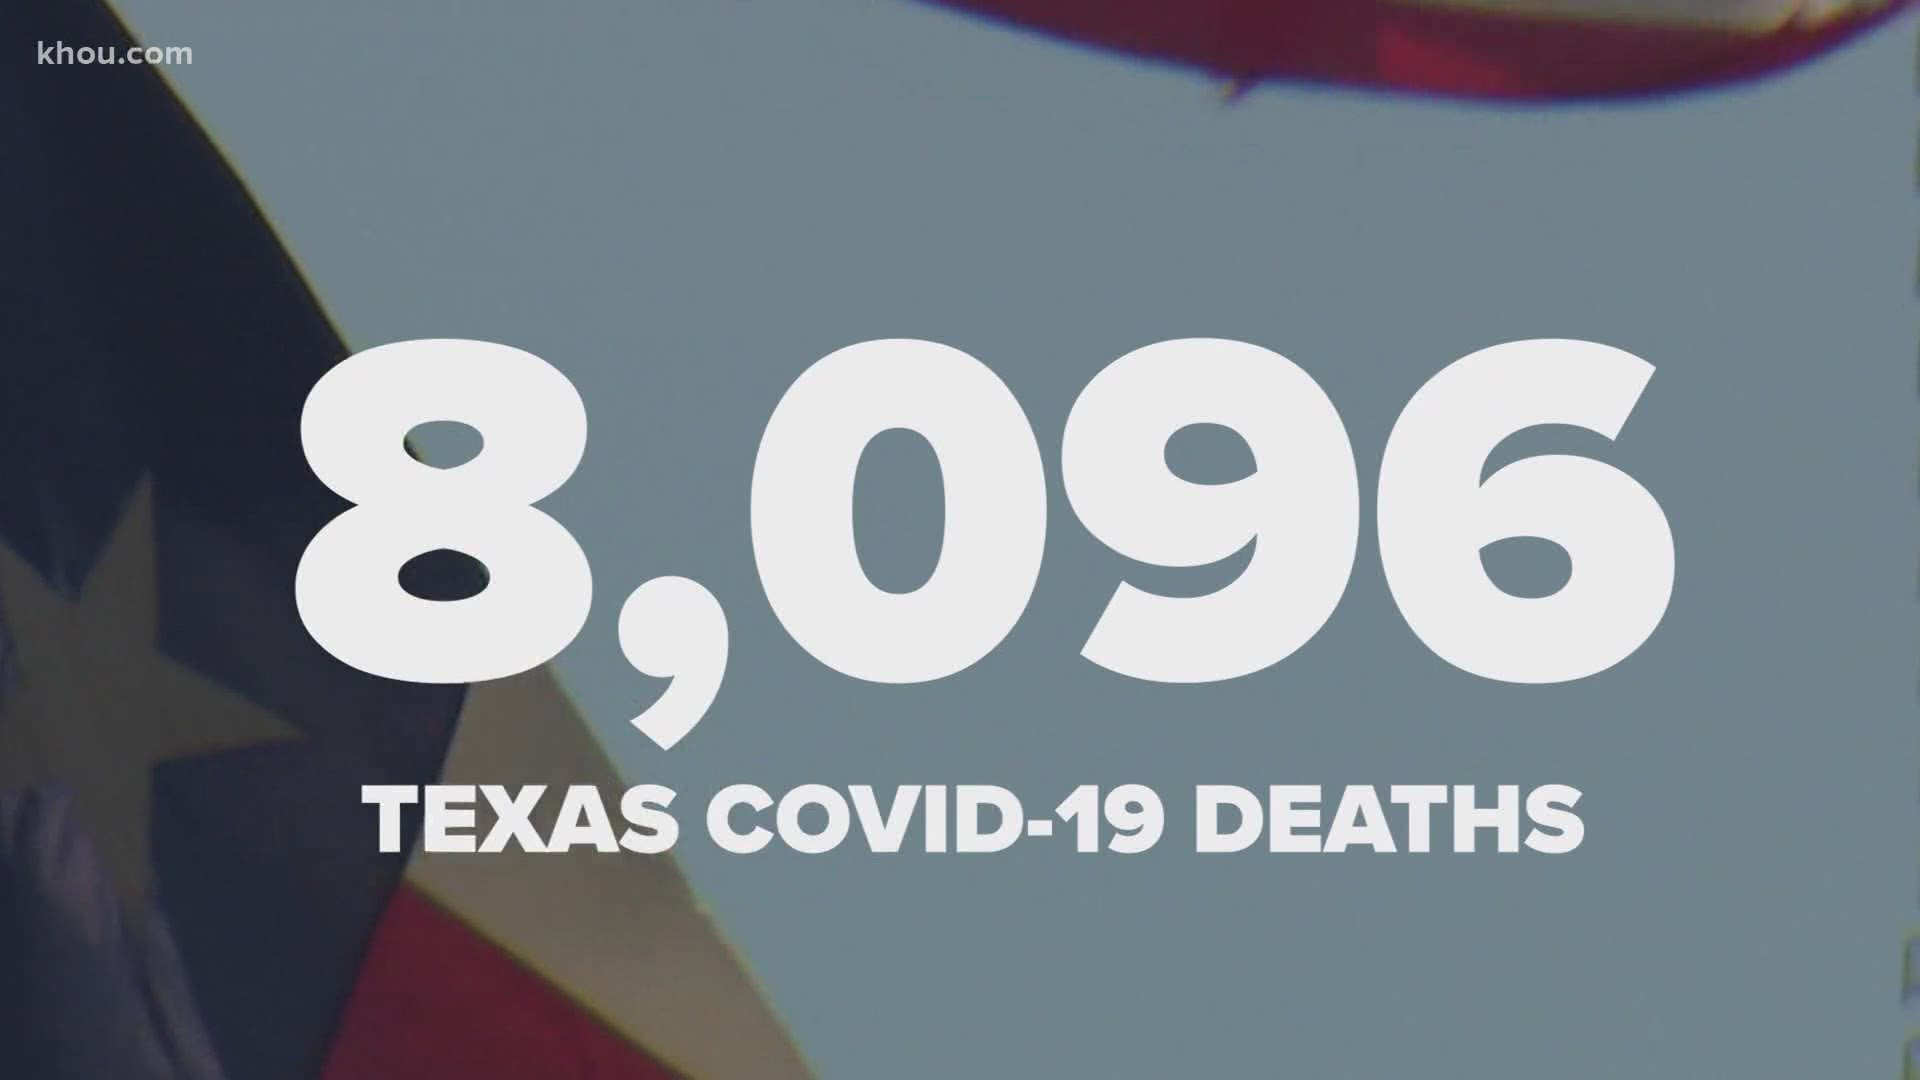 The Texas Department of Health and Human Services reported 7,039 new COVID-19 cases Friday and 293 newly reported deaths.